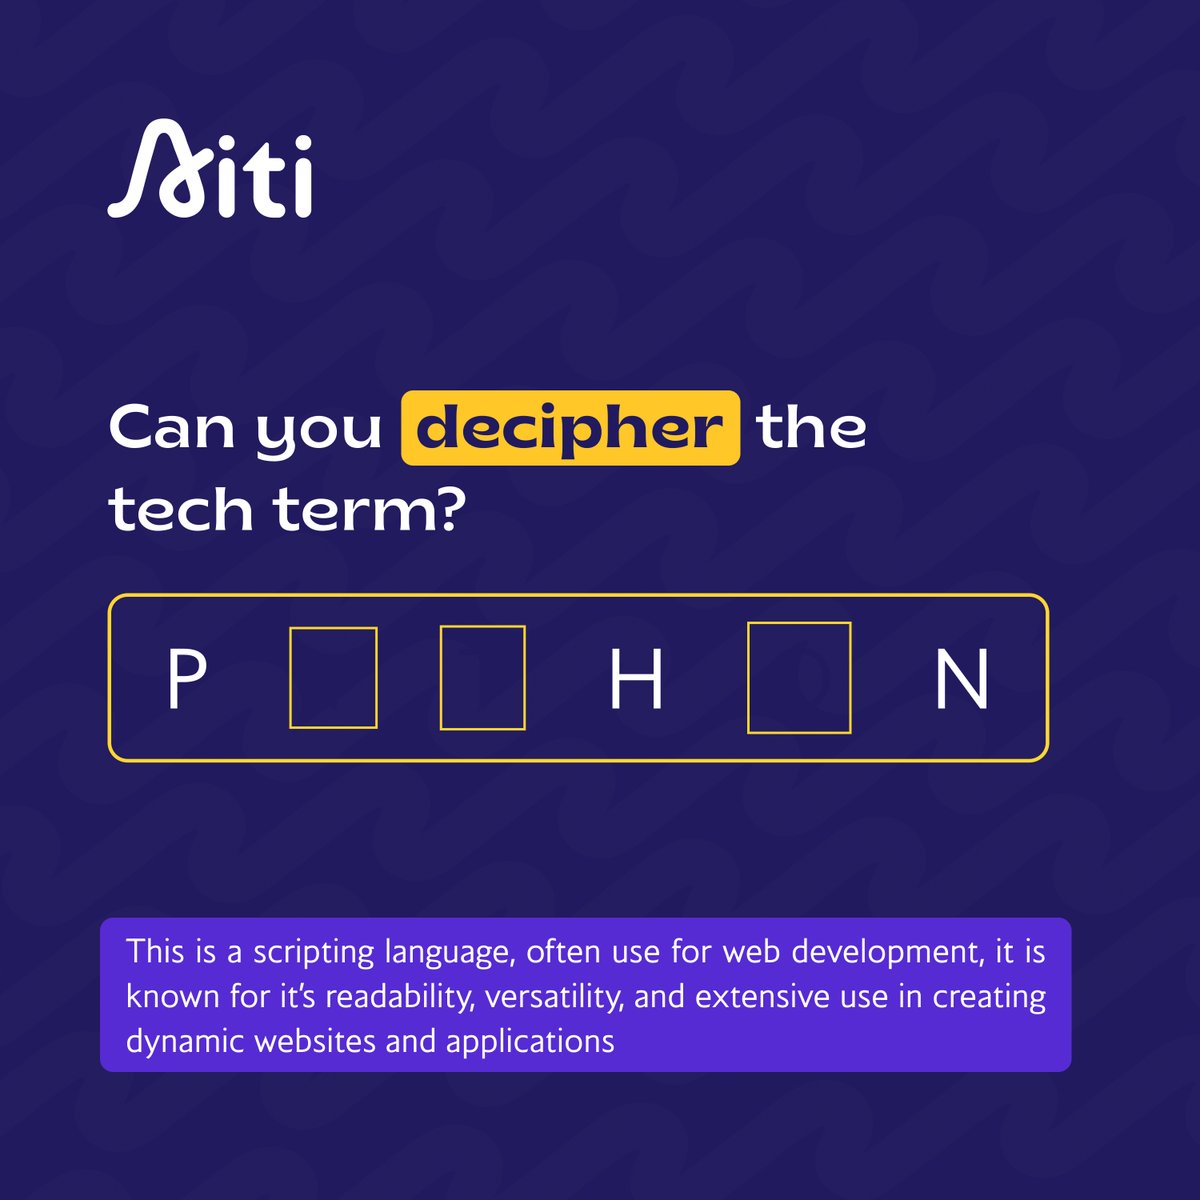 When it comes to tech, those 7 letters are most definitely not a snake! 🚫🐍 

Crack the code and reveal the mystery scripting language. 

Your hint: readability, versatility, and dynamic creations! 💻😄 

#NotASnake #TechTrivia #DecipherTheCode #Aiti